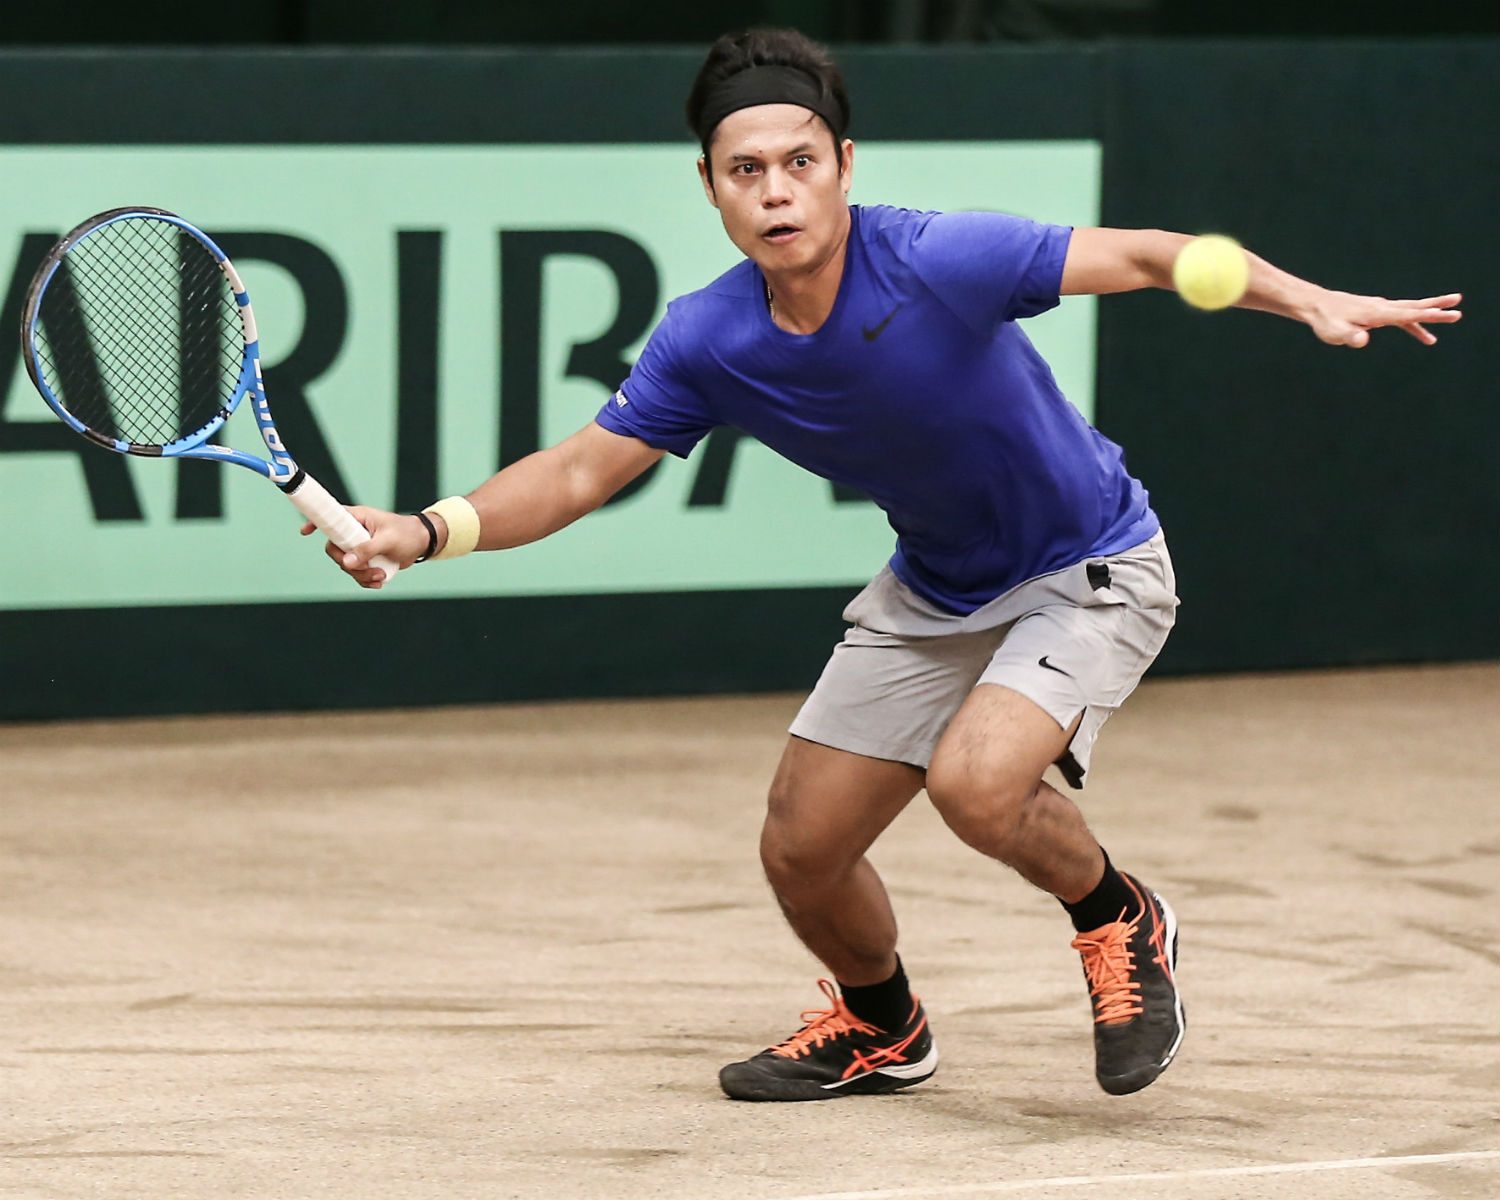 Thailand demolishes PH to advance to Davis Cup Asia Oceania Group II finals